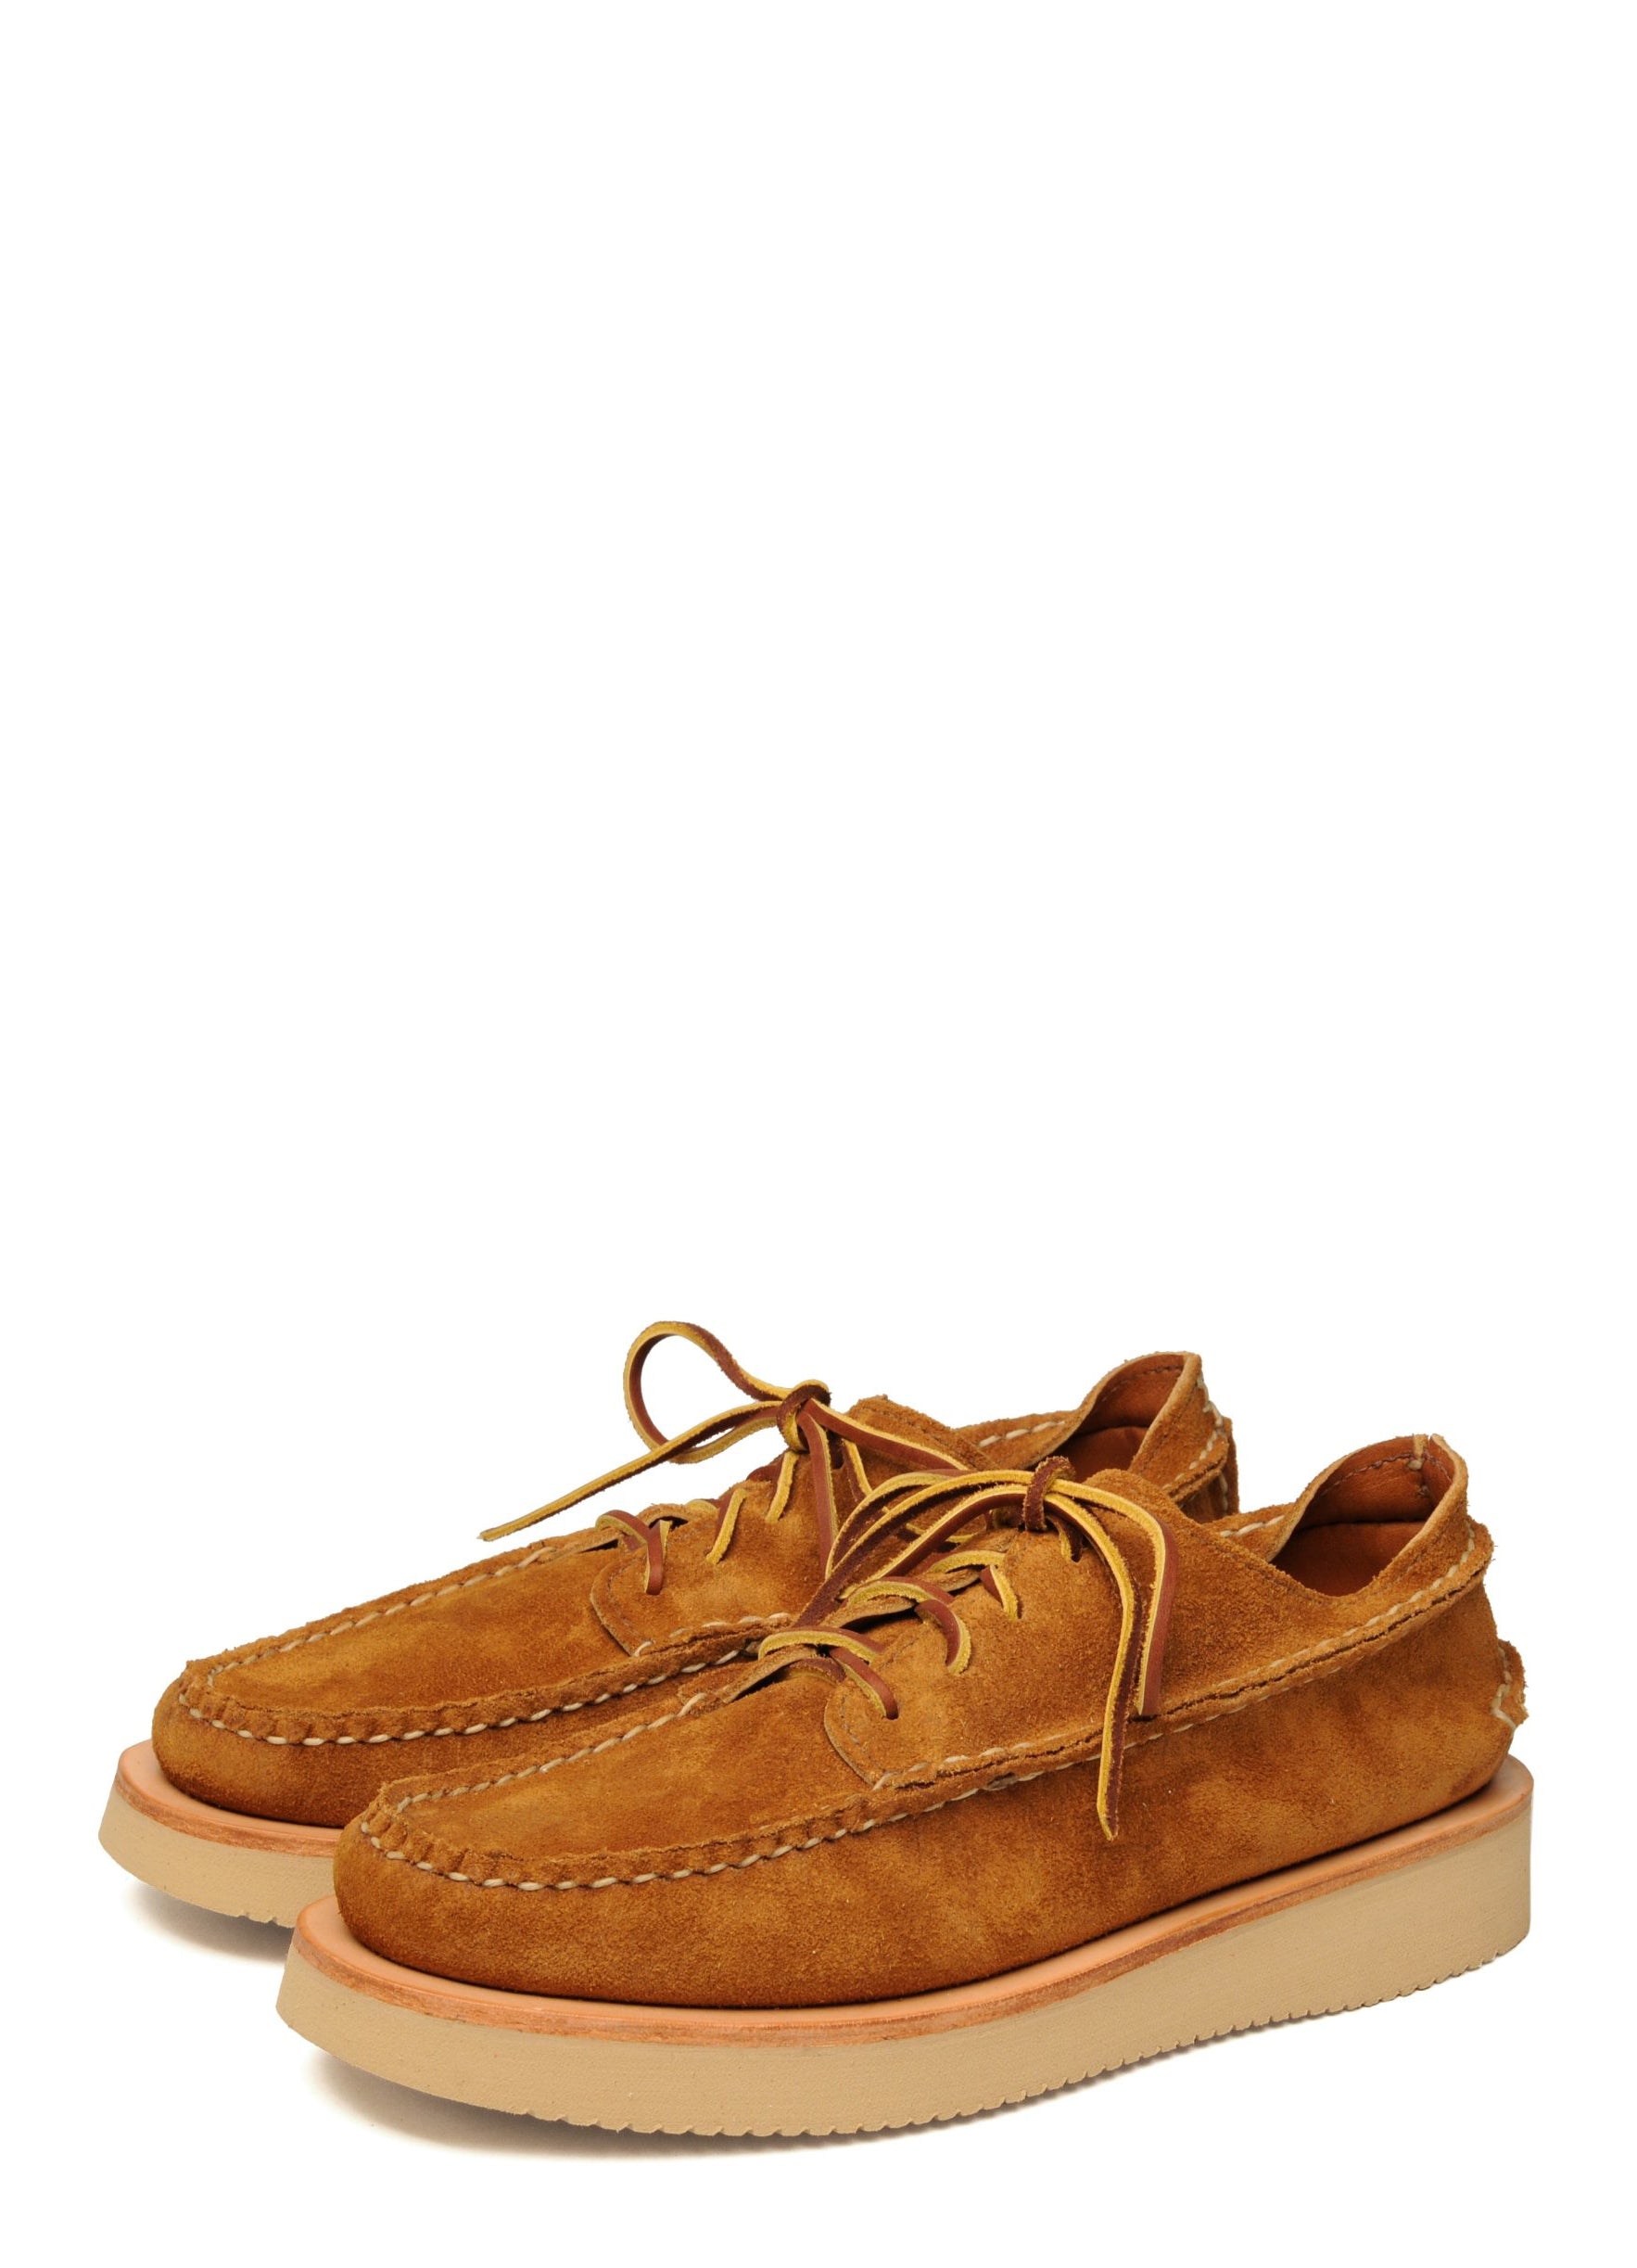 SEMI HANDSEWN MAINE GUIDE OX DB | Moccasin Shoe | FO G Brown